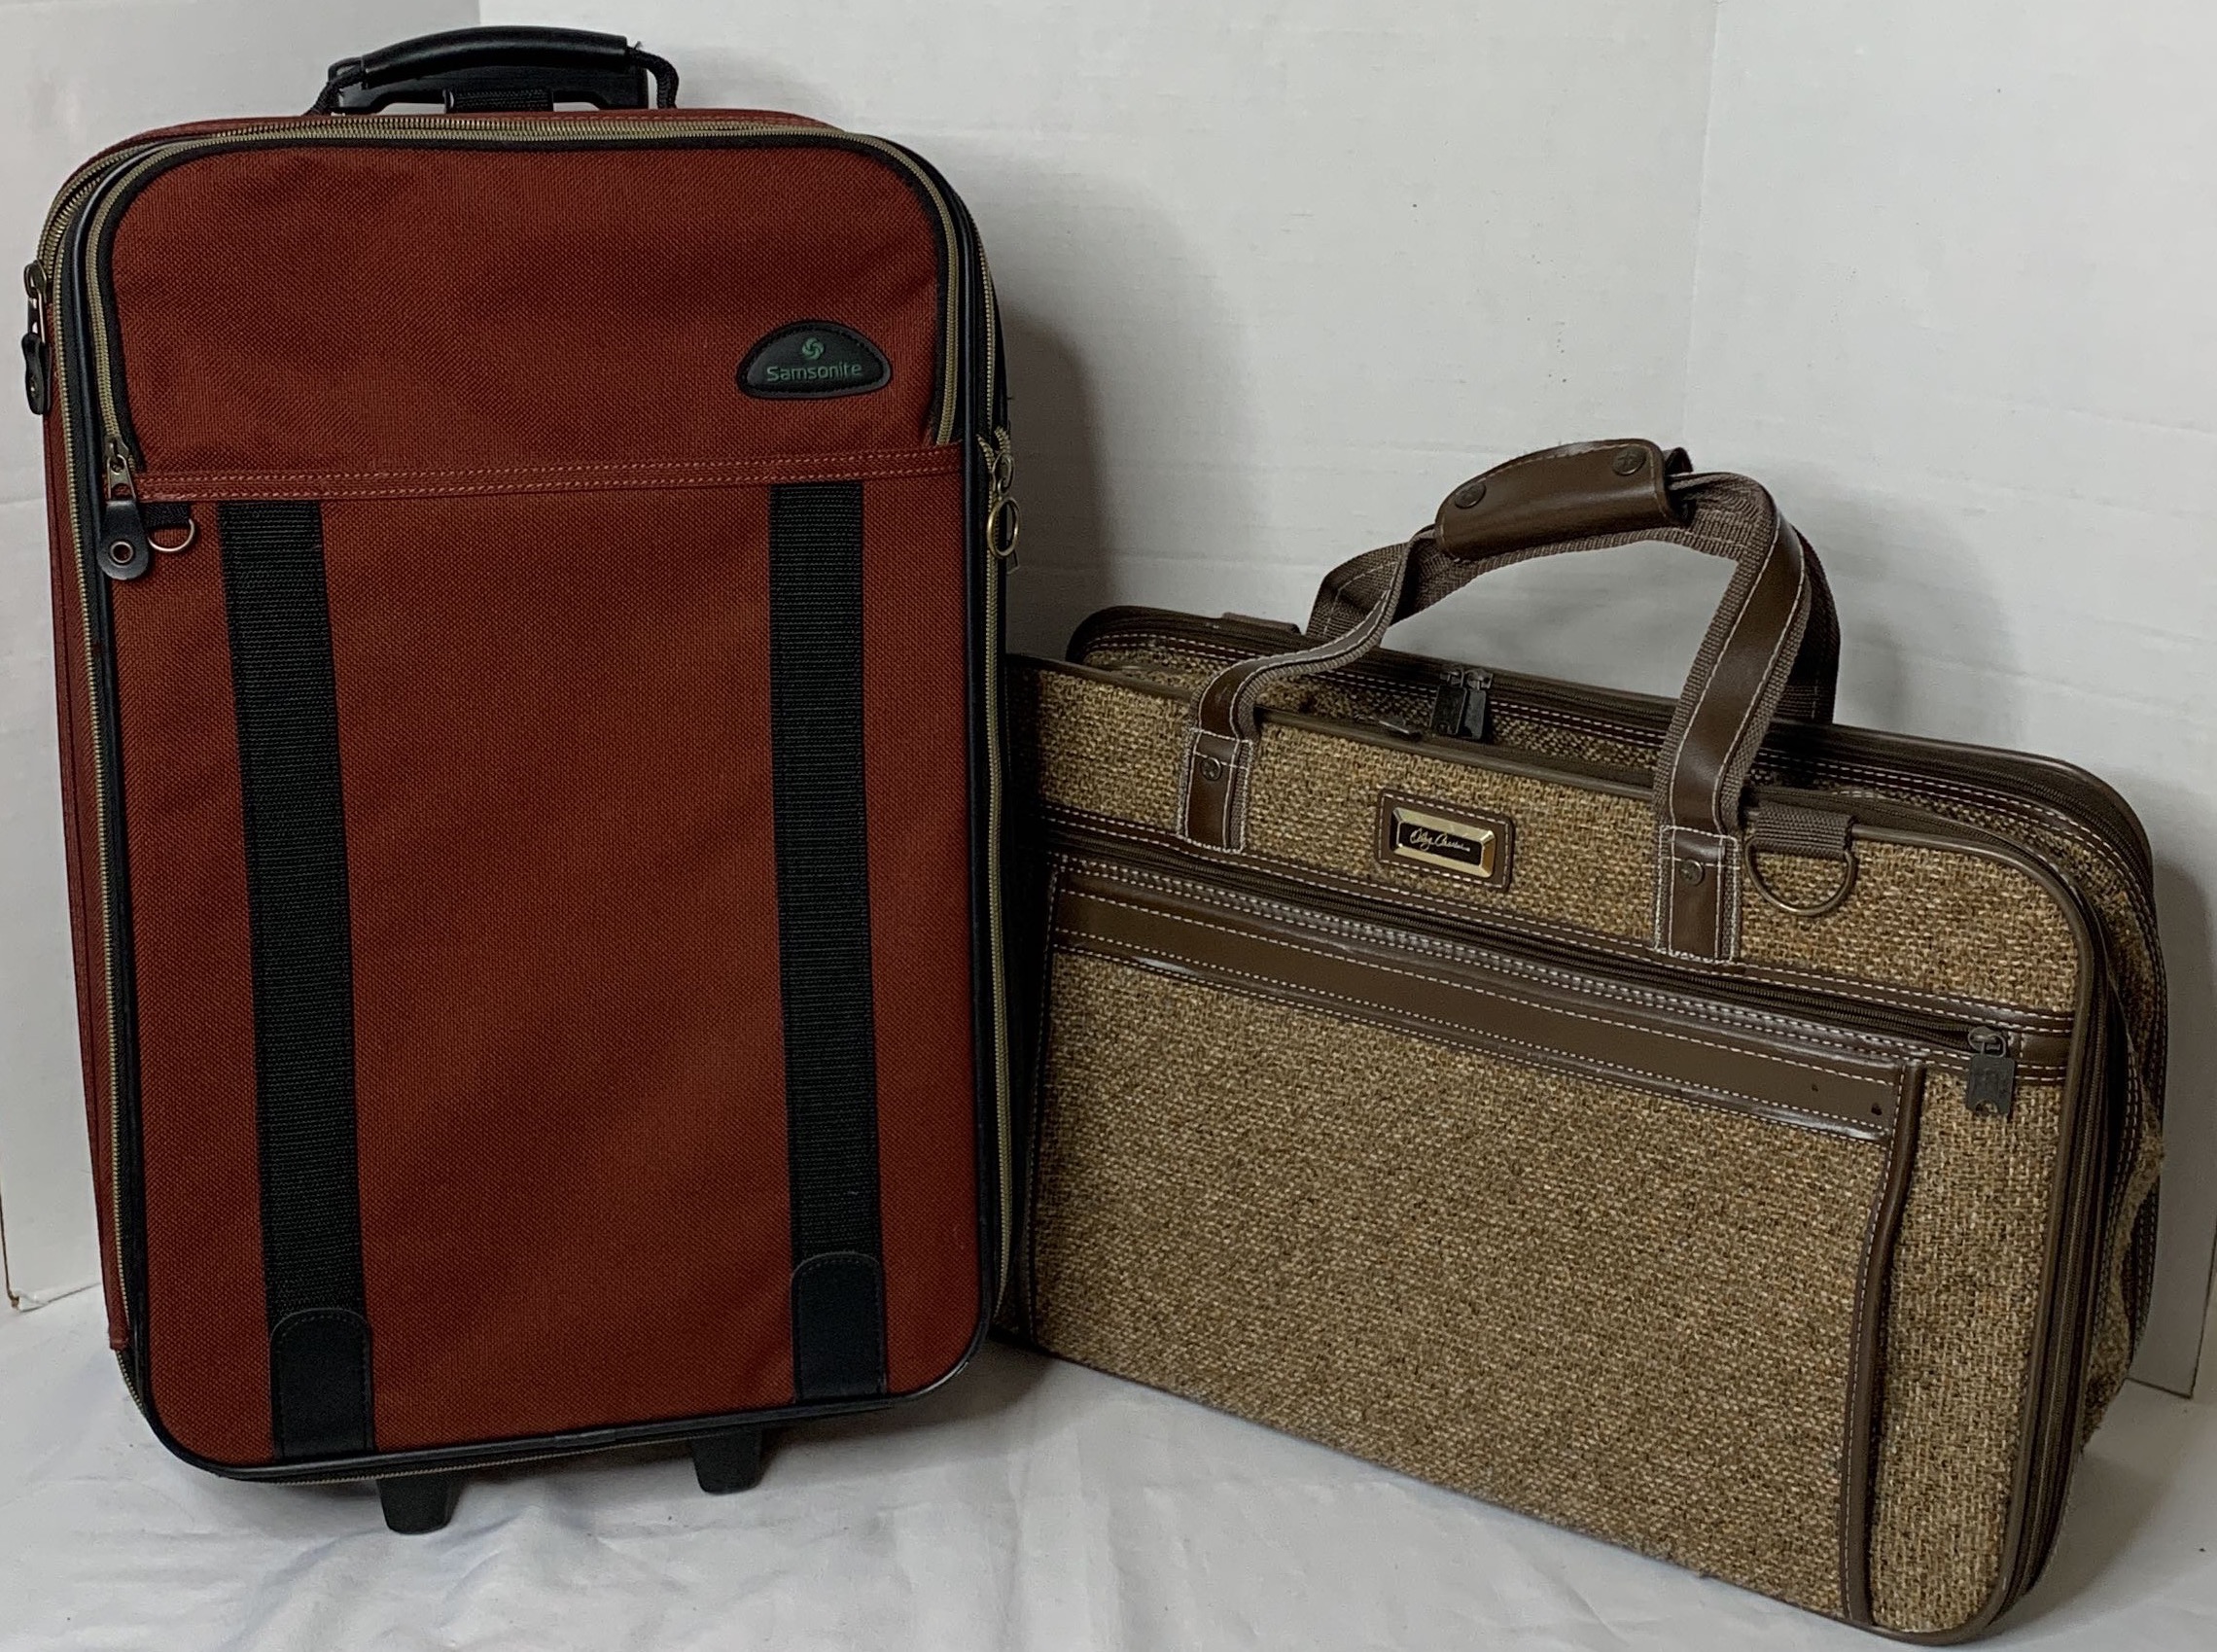 At Auction: HARTMANN LEATHER LUGAGE CARRY ON OR BRIEFCASE